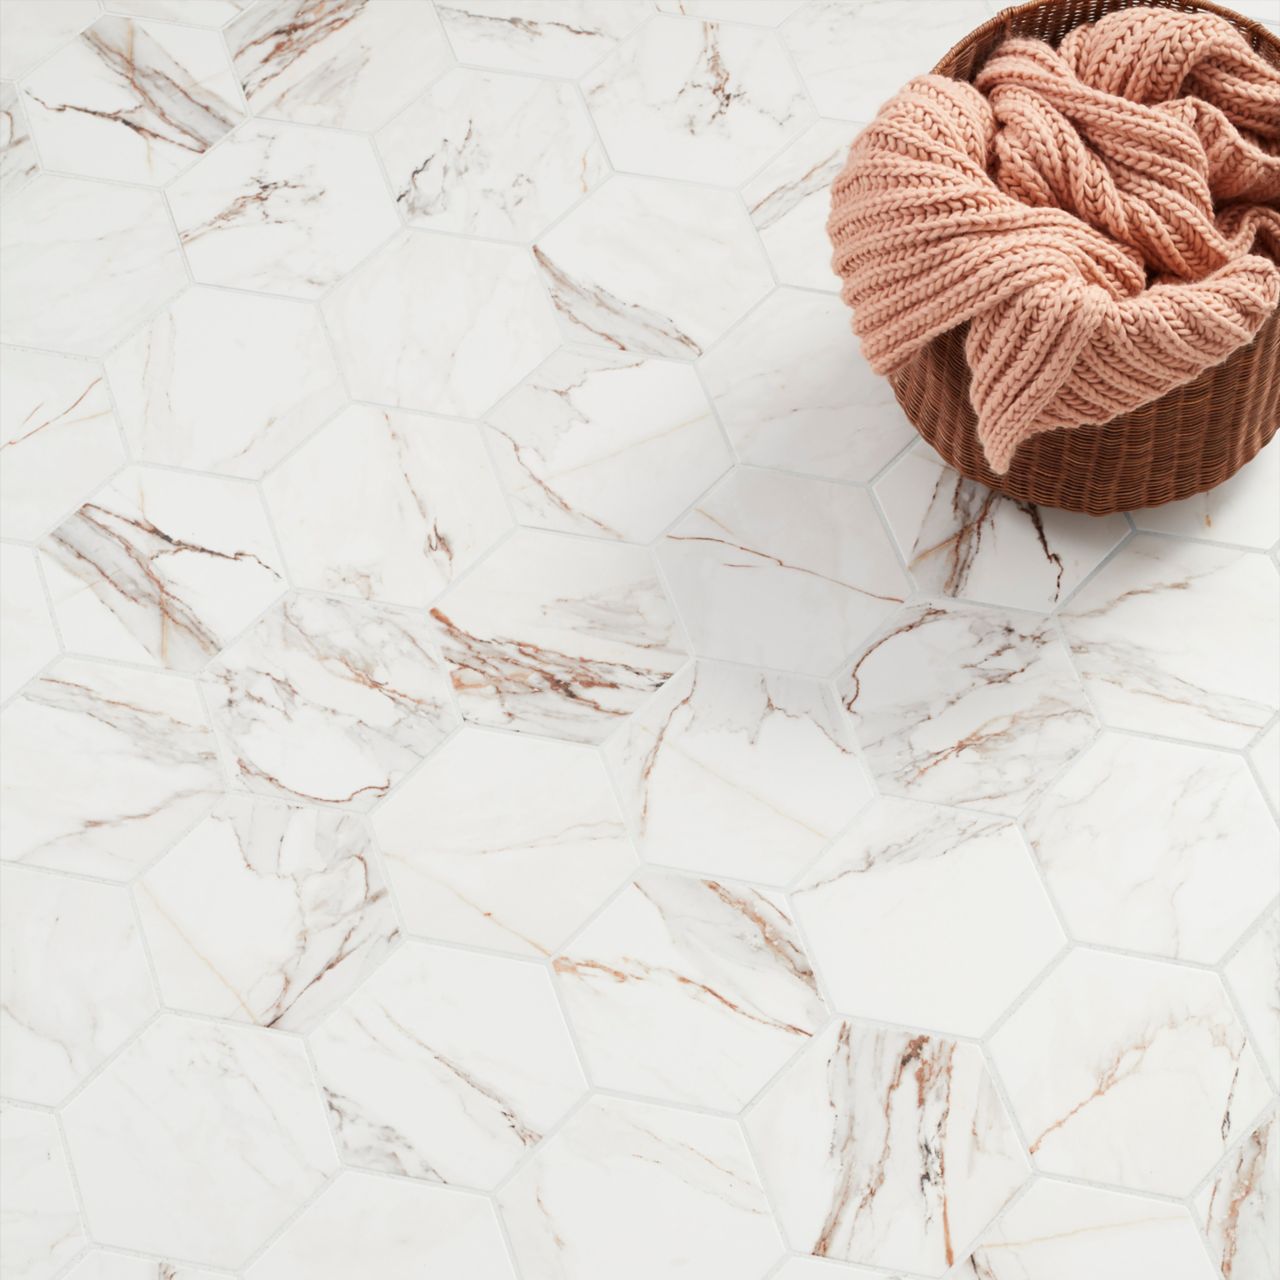 Shop Floor Tiles at Great Prices | The Tile Shop